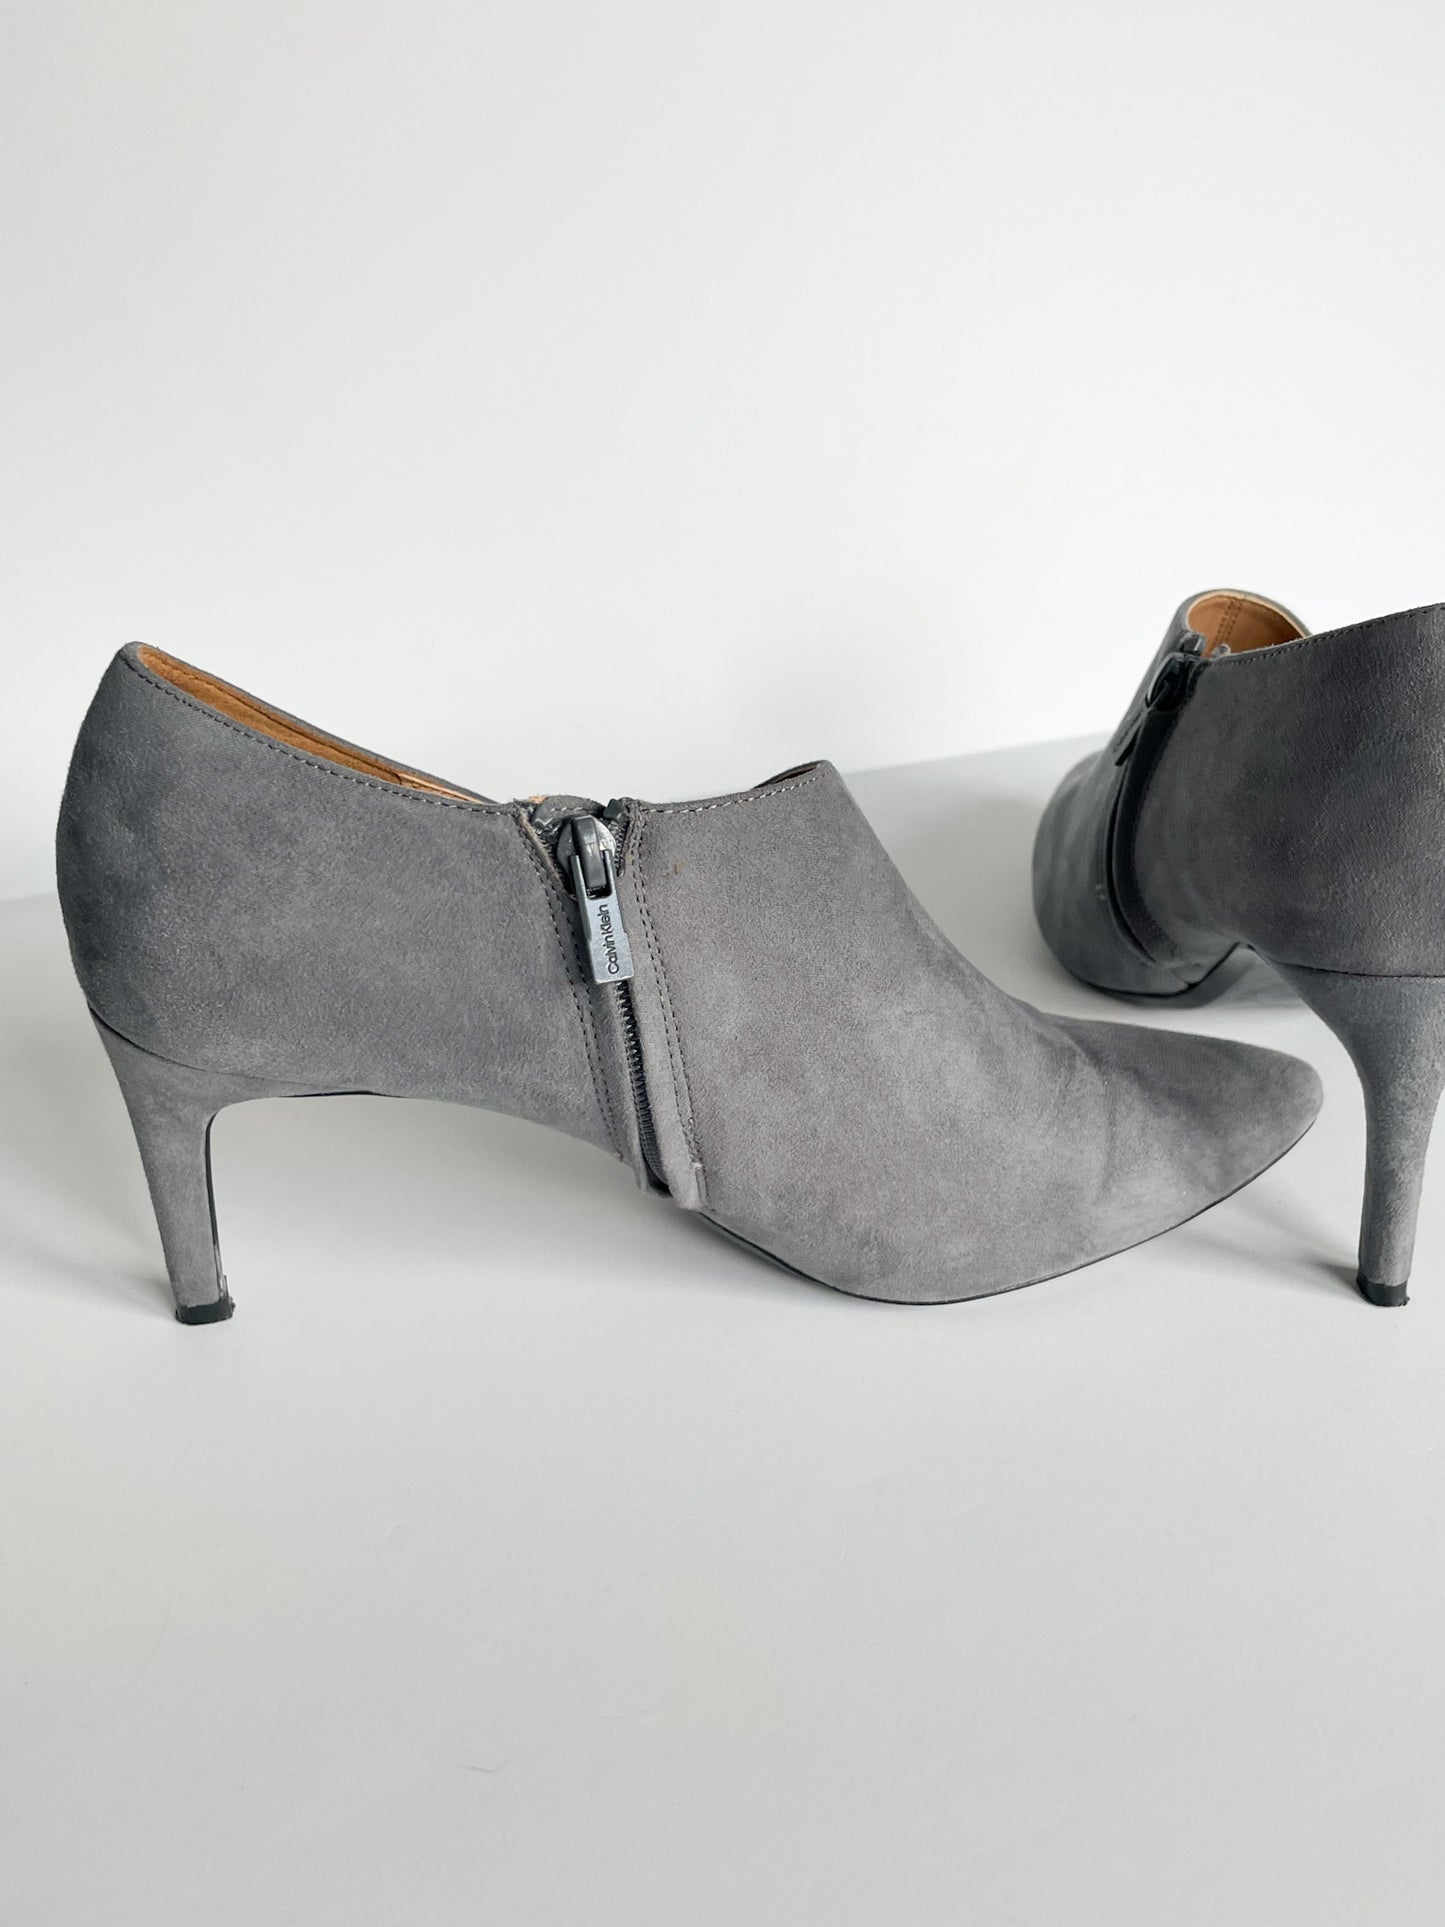 Calvin Klein Grey Faux Suede Pointed Toe Ankle Boot 3.25" Heels - Size 9.5